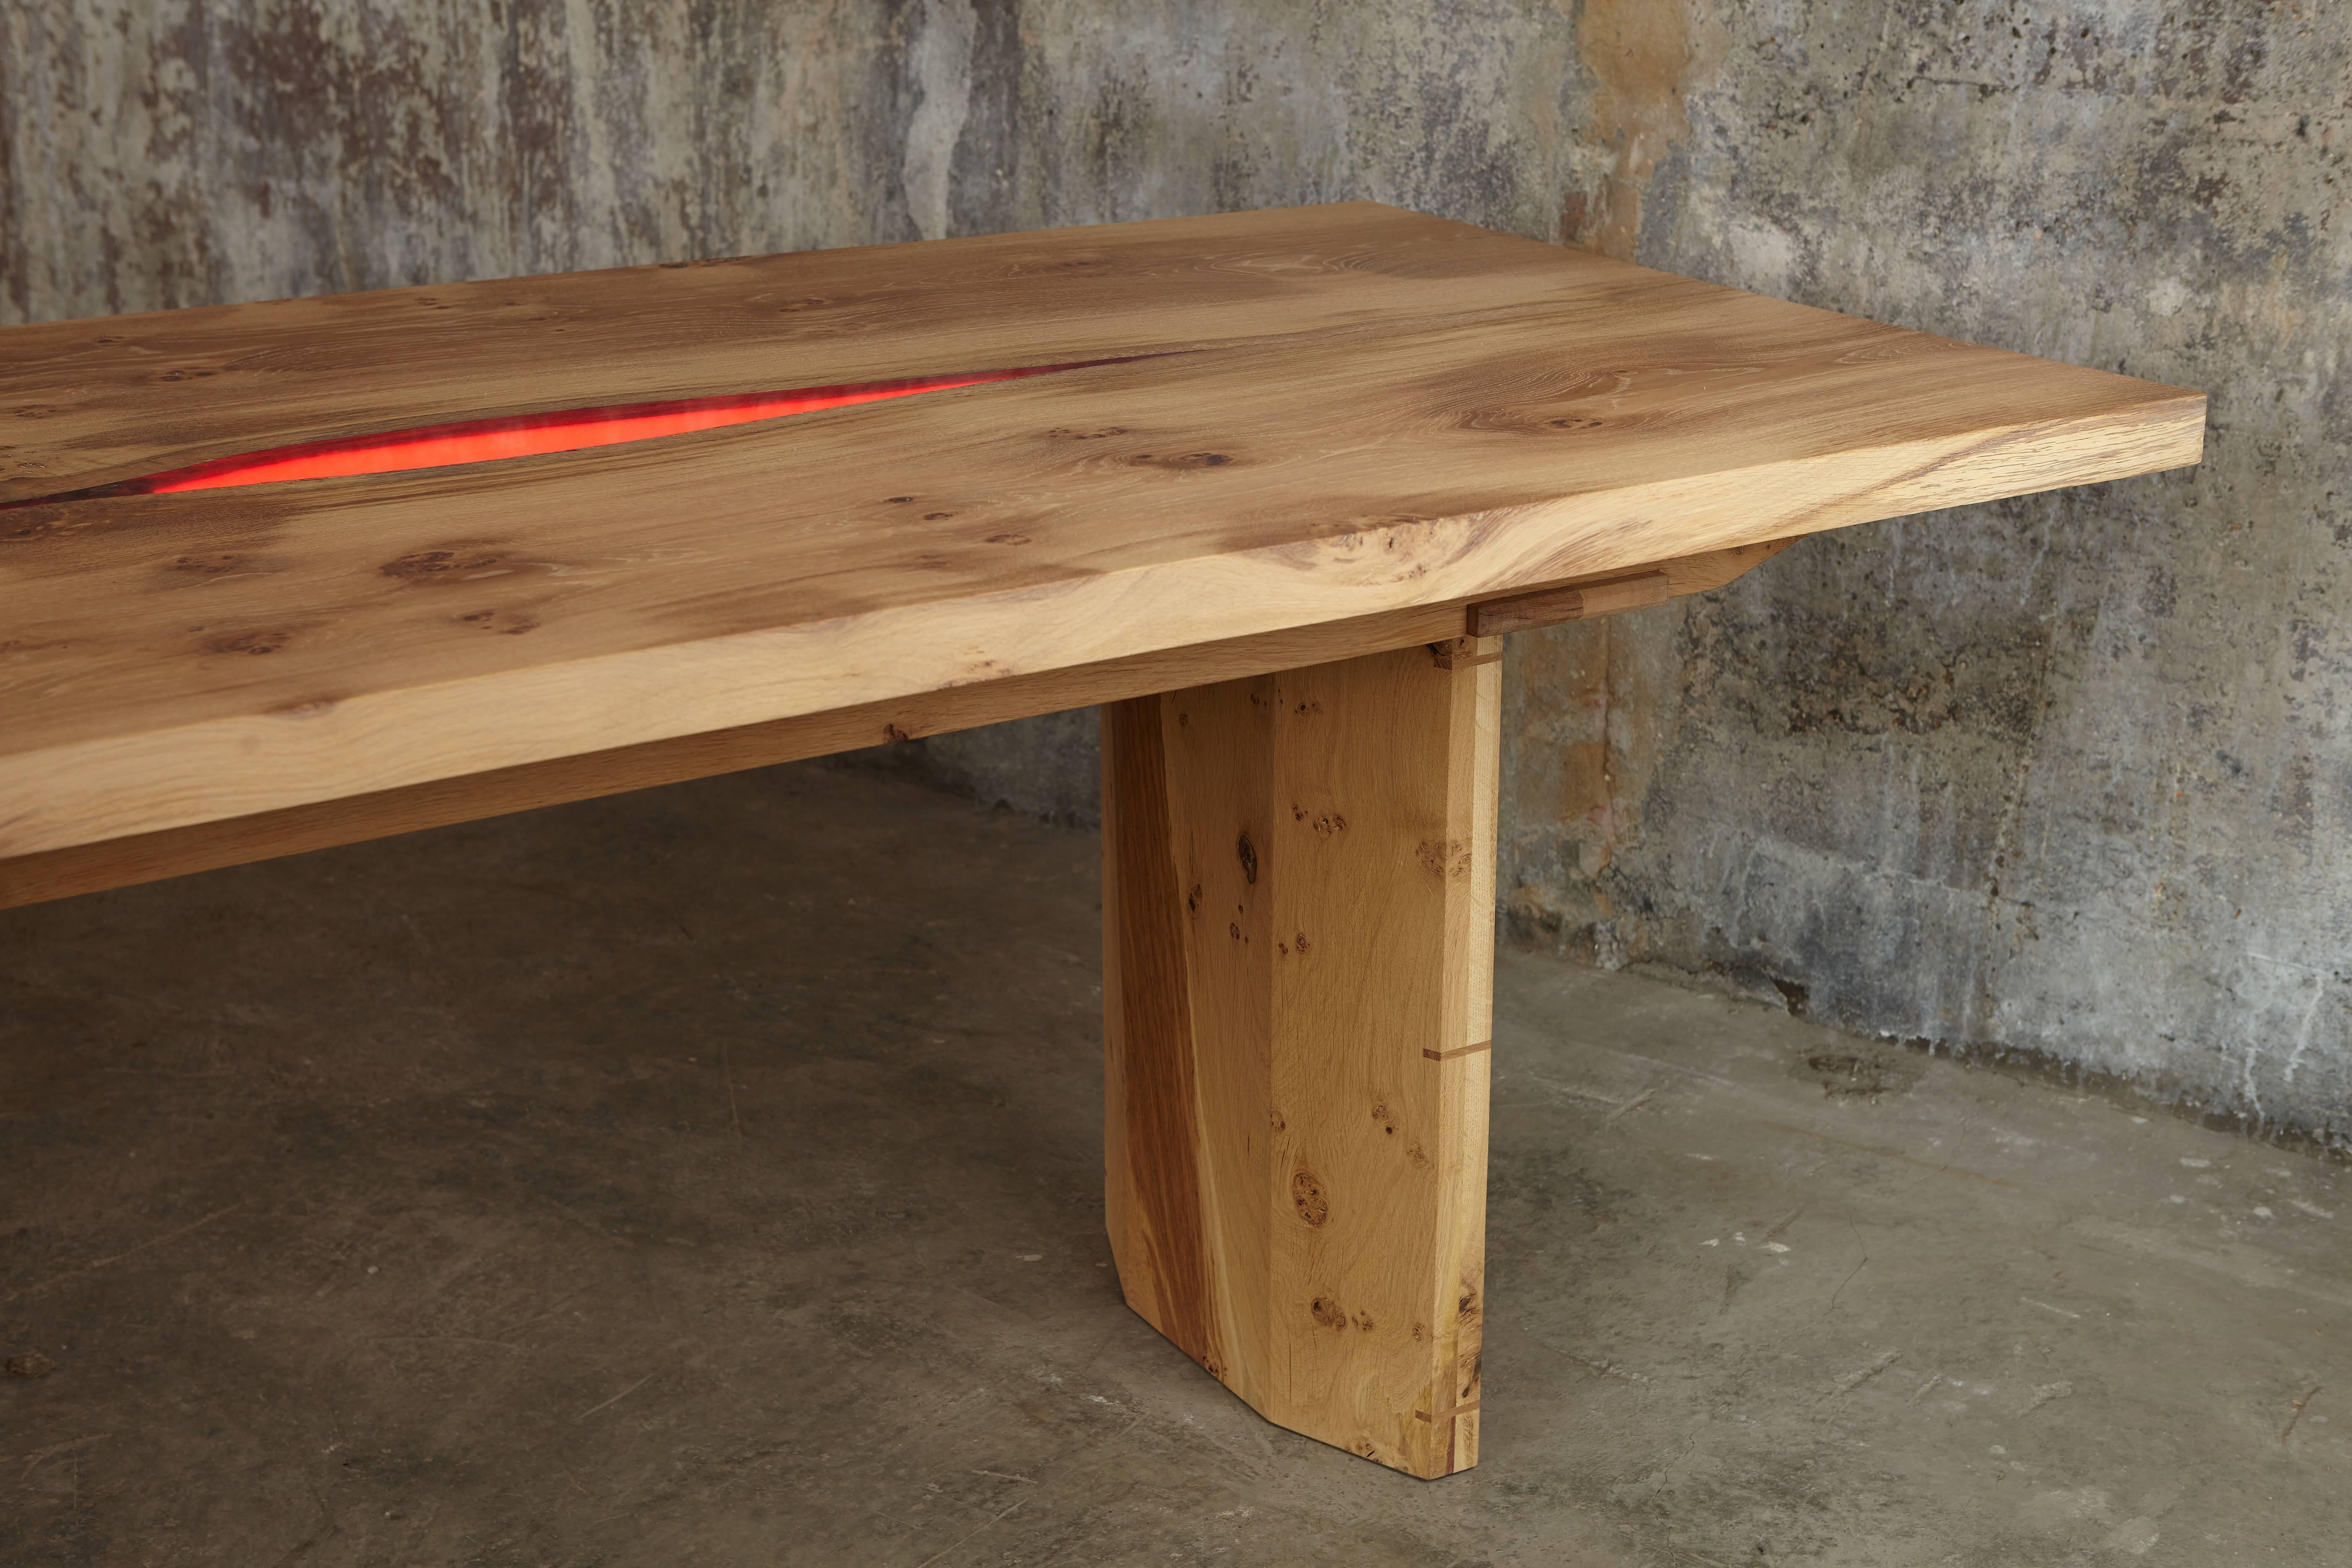 Made from solid English oak. The two tables are designed to sit end to end giving a total length of 5.2 metres / 17ft or positioned apart.  The book-matched inverted live edge central section has been infilled with a clear resin which is backlit